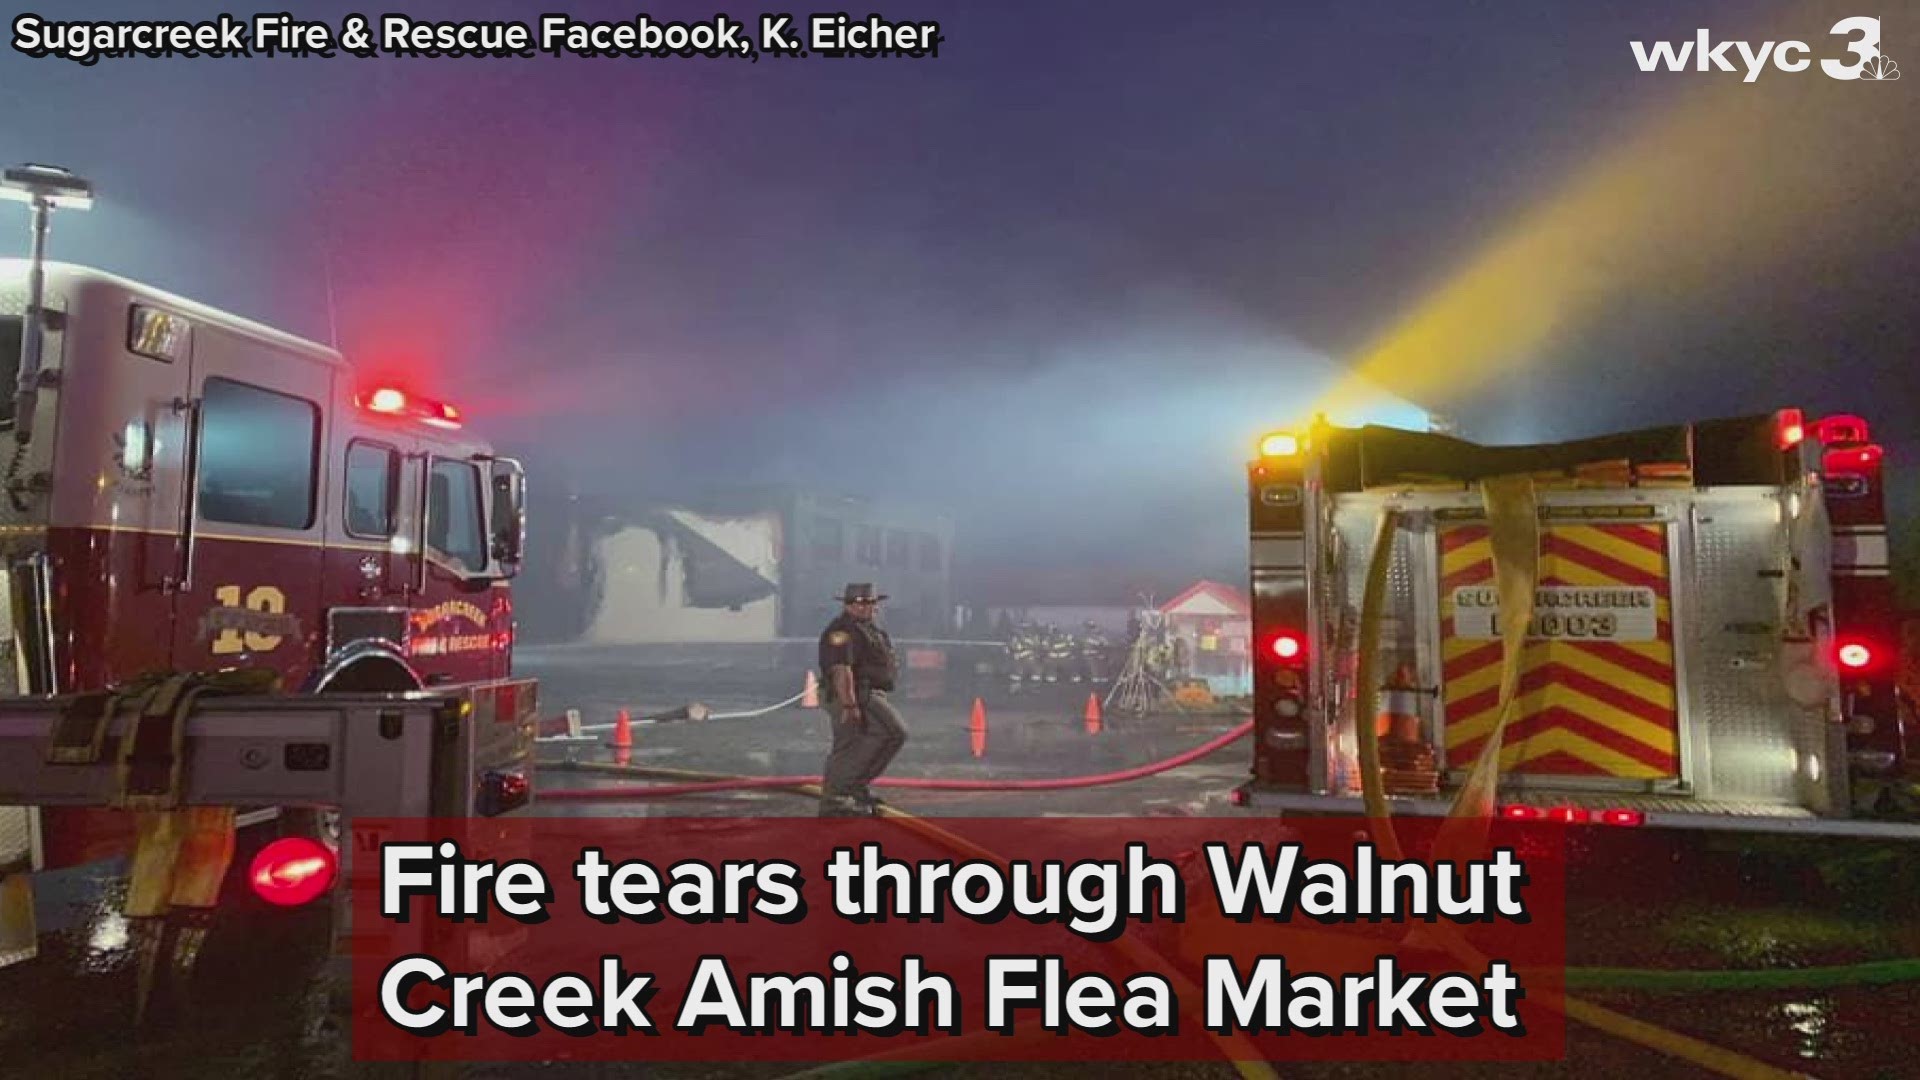 The 'large commercial structure fire' hit the flea market early Wednesday morning.